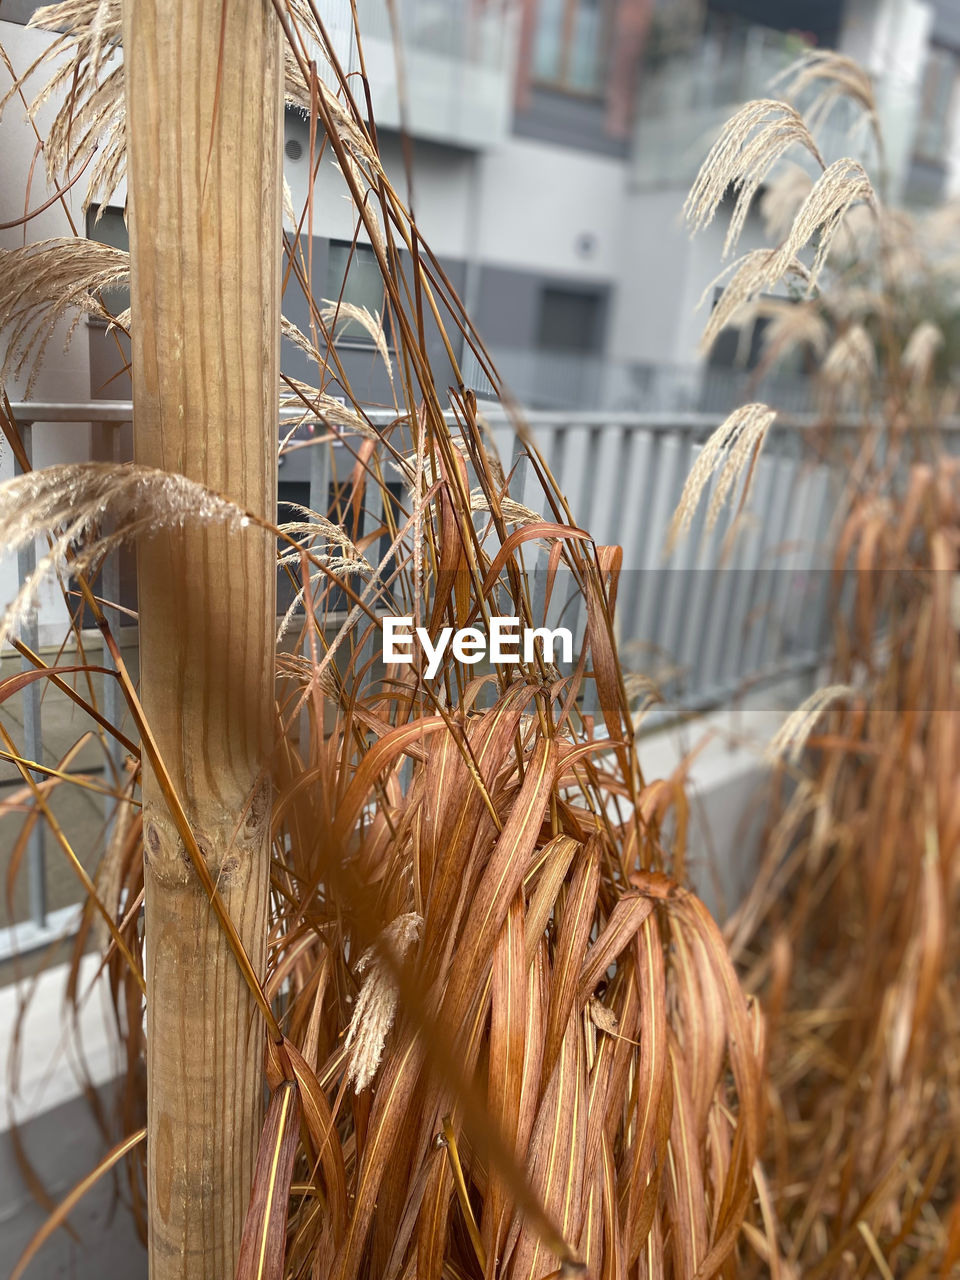 plant, focus on foreground, wood, nature, no people, day, outdoors, close-up, architecture, agriculture, dry, branch, food and drink, food, spring, built structure